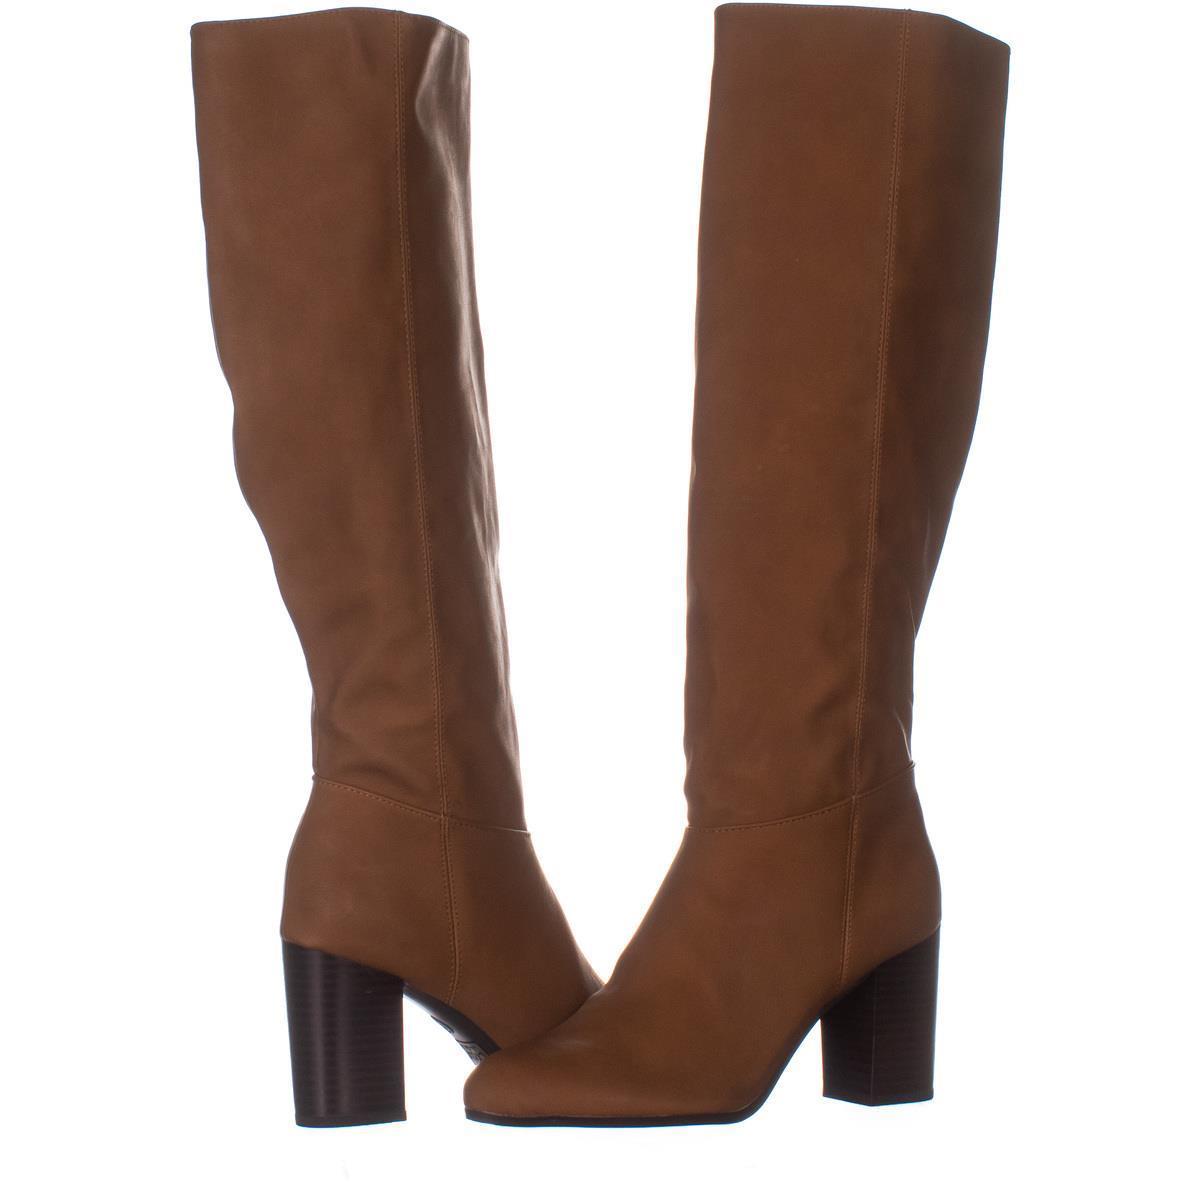 Circus by Sam Edelman Sibley Knee High Boots 927, Luggage, 9.5 US / 39. ...